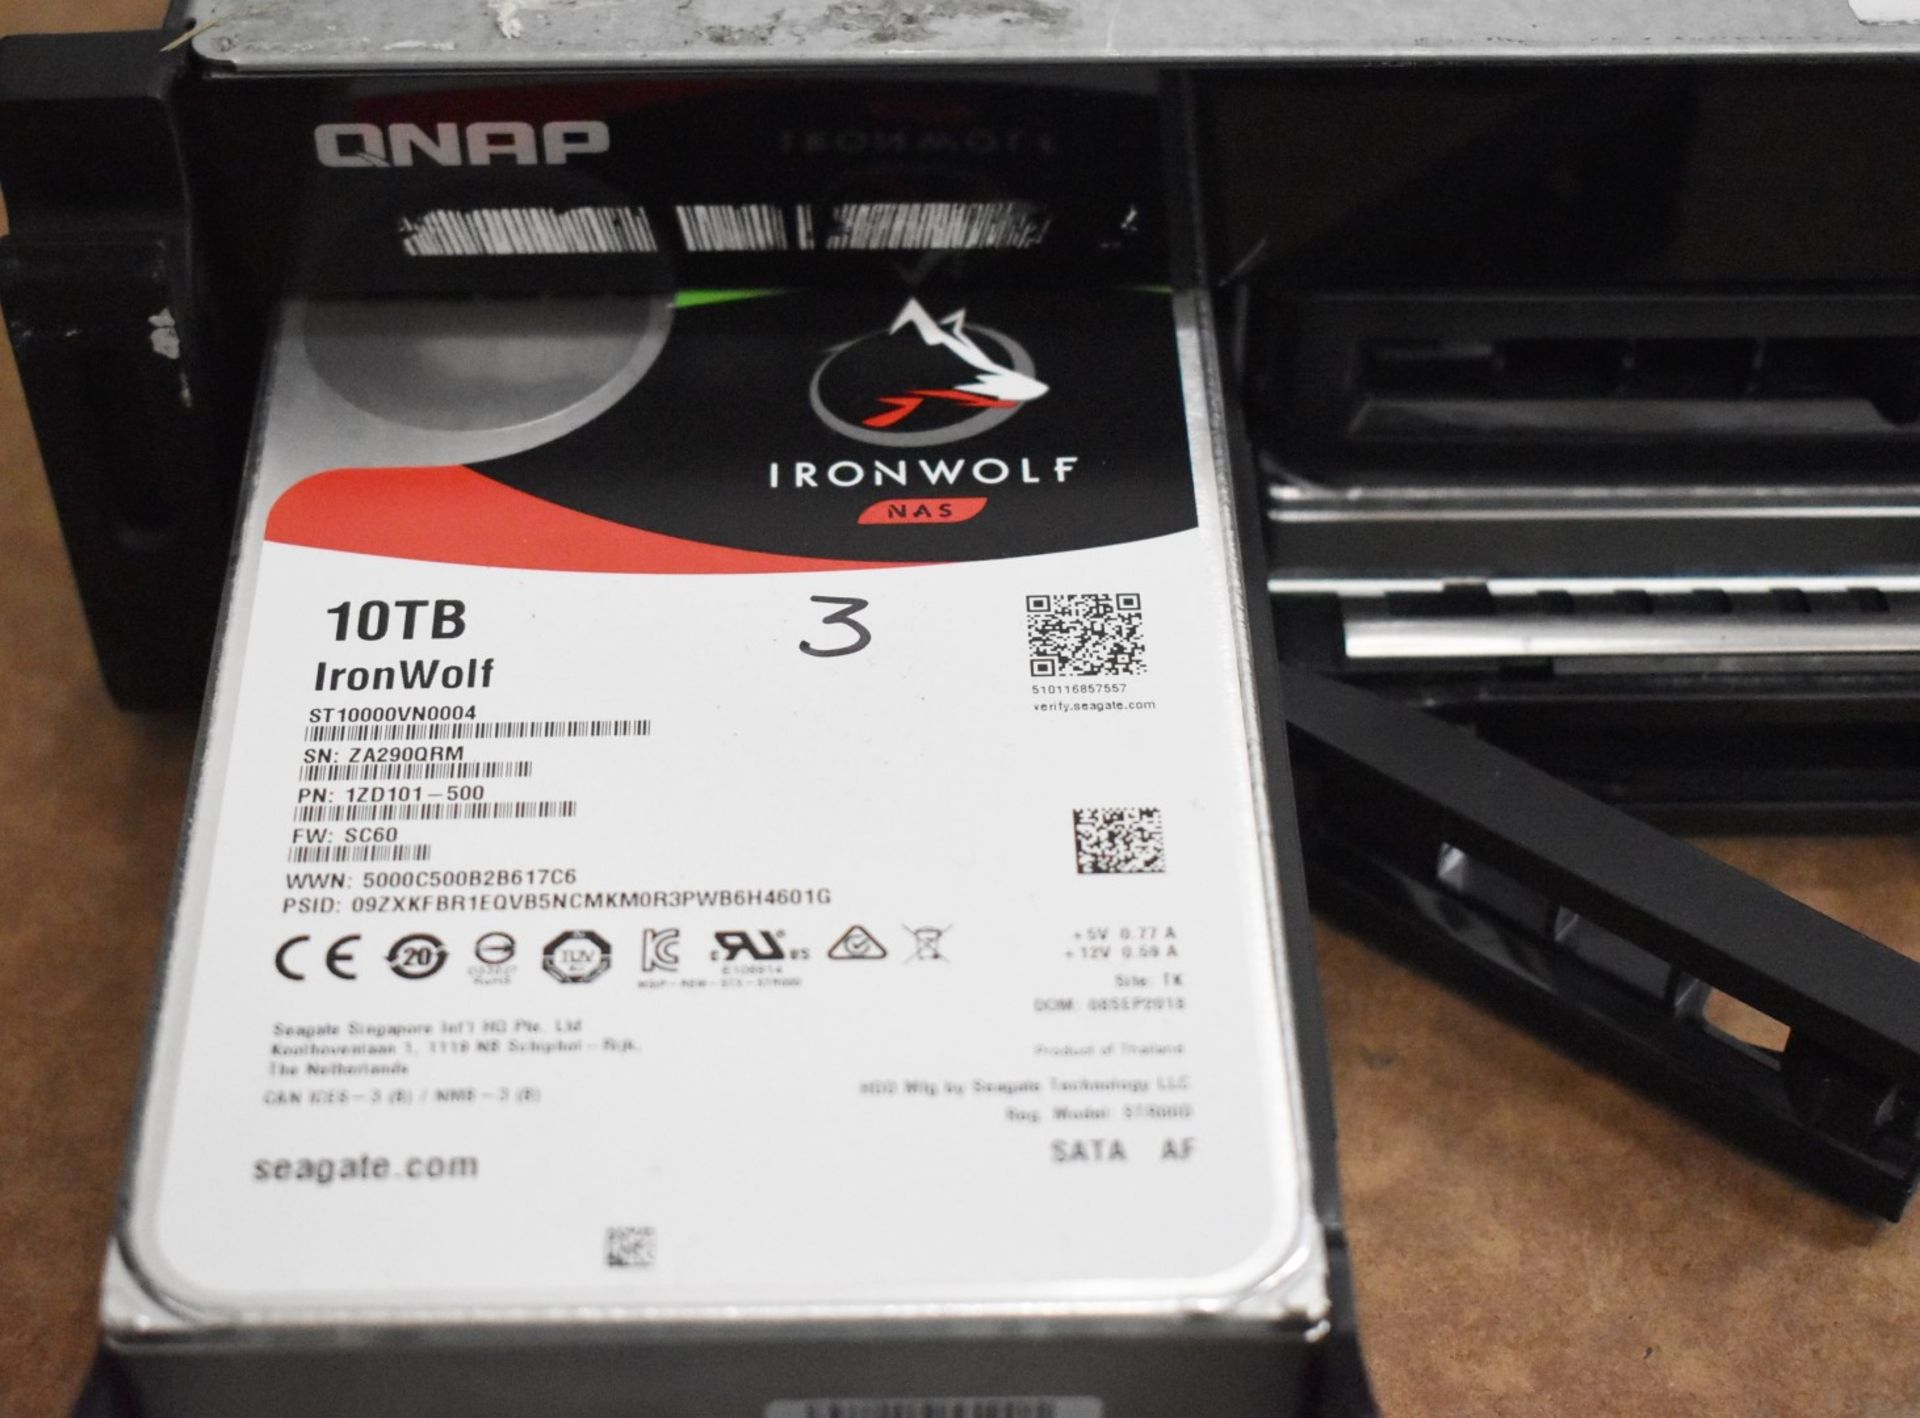 1 x QNAP Network Attached Storage Unit - Model TS-879U-RP - Includes 3 x Ironwolf 10tb Hard Drives - Image 6 of 11